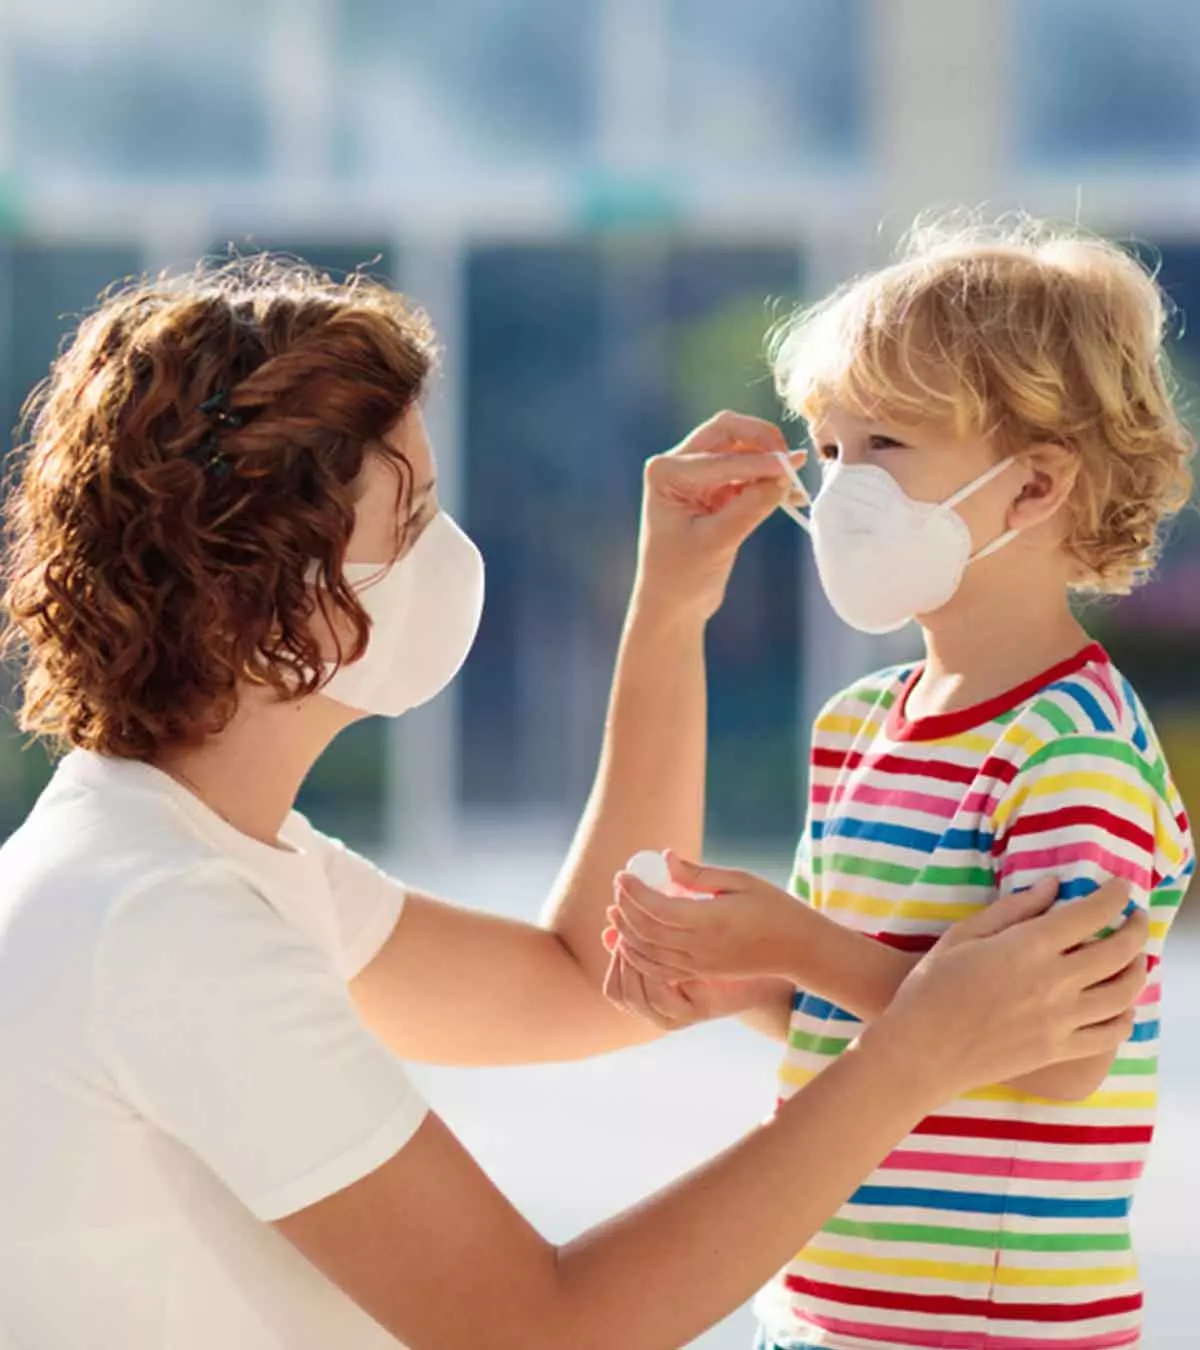 mask-or-not-to-mask-children-to-overcome-covid-19